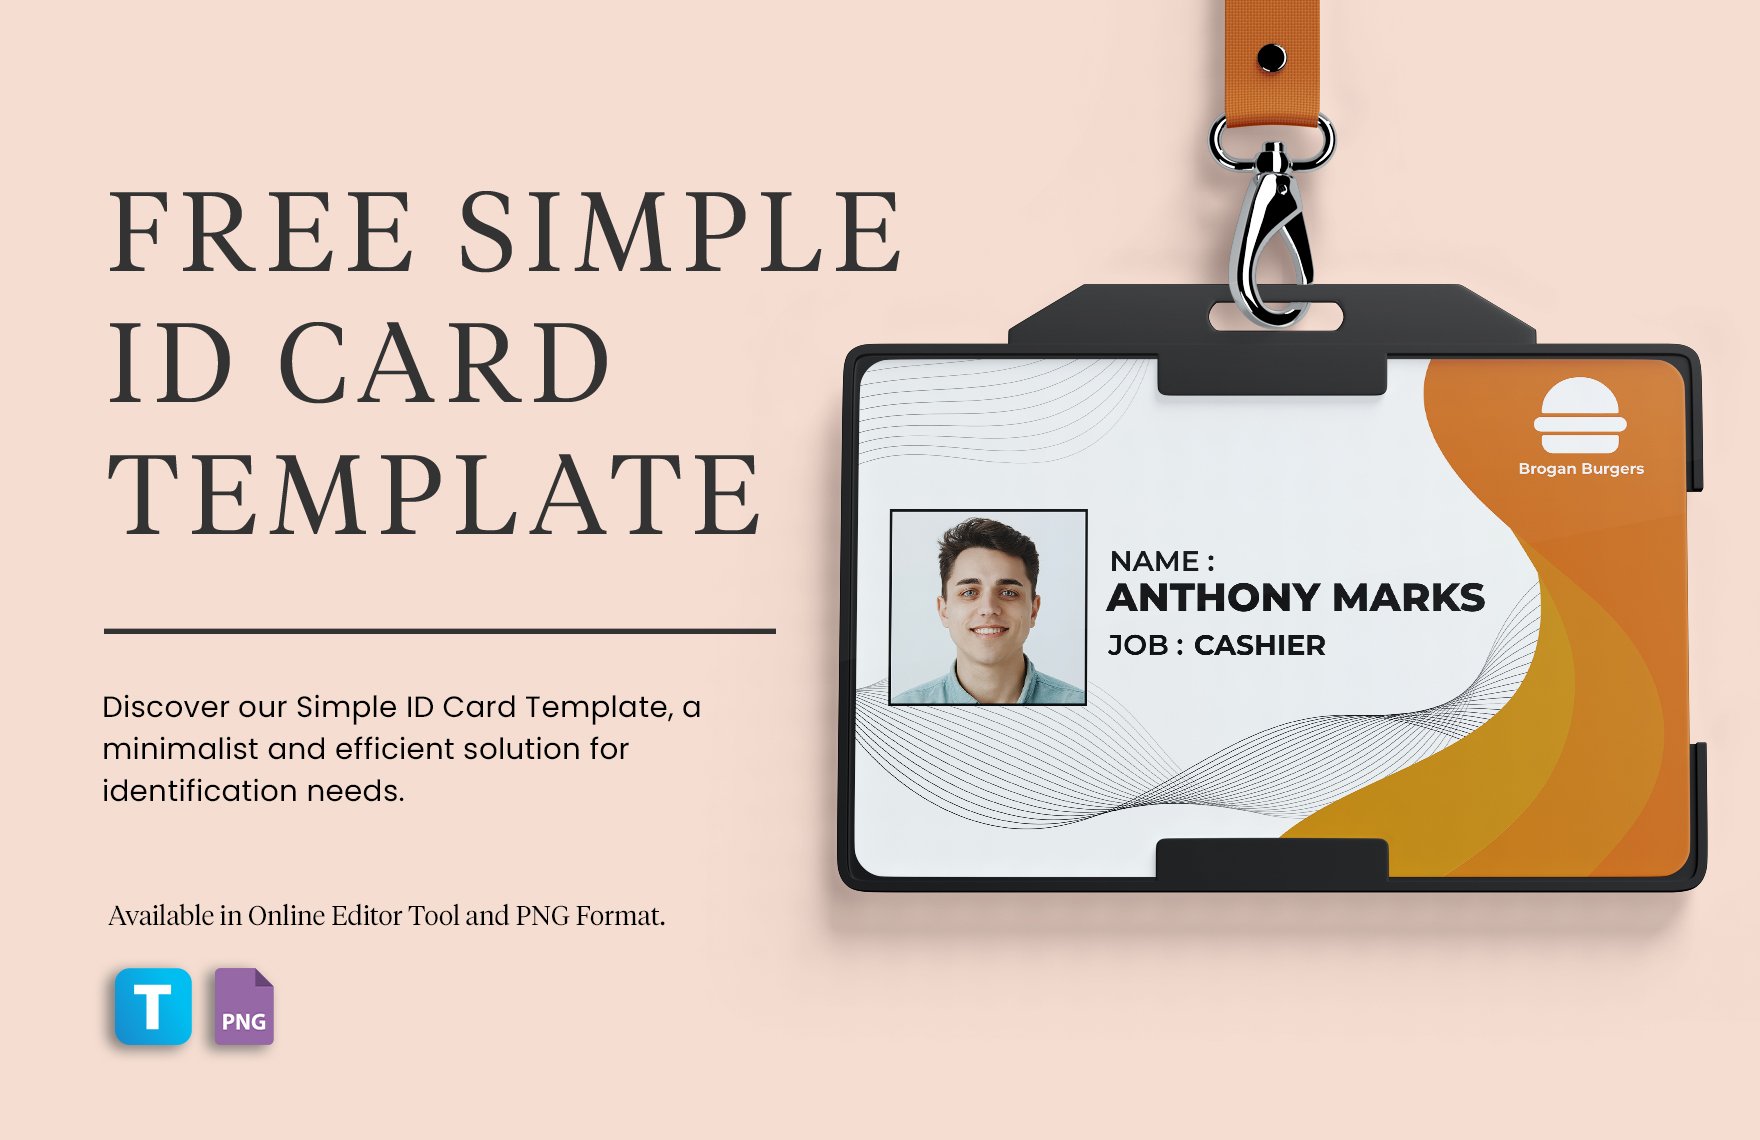 Free Simple ID Card Template in PNG